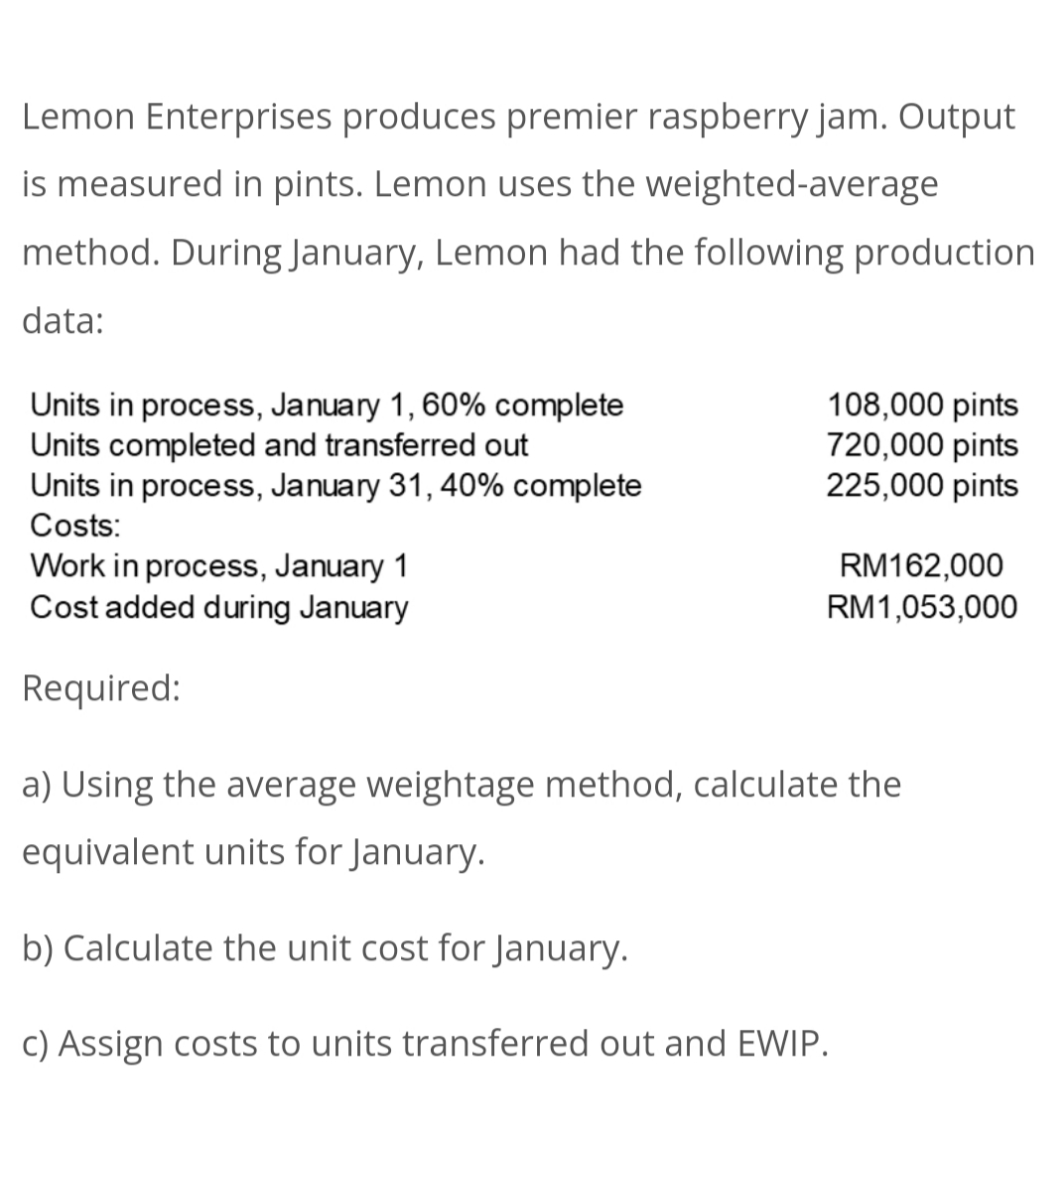 Lemon Enterprises produces premier raspberry jam. Output
is measured in pints. Lemon uses the weighted-average
method. During January, Lemon had the following production
data:
Units in process, January 1, 60% complete
Units completed and transferred out
Units in process, January 31, 40% complete
Costs:
108,000 pints
720,000 pints
225,000 pints
RM162,000
Work in process, January 1
Cost added during January
RM1,053,000
Required:
a) Using the average weightage method, calculate the
equivalent units for January.
b) Calculate the unit cost for January.
c) Assign costs to units transferred out and EWIP.
